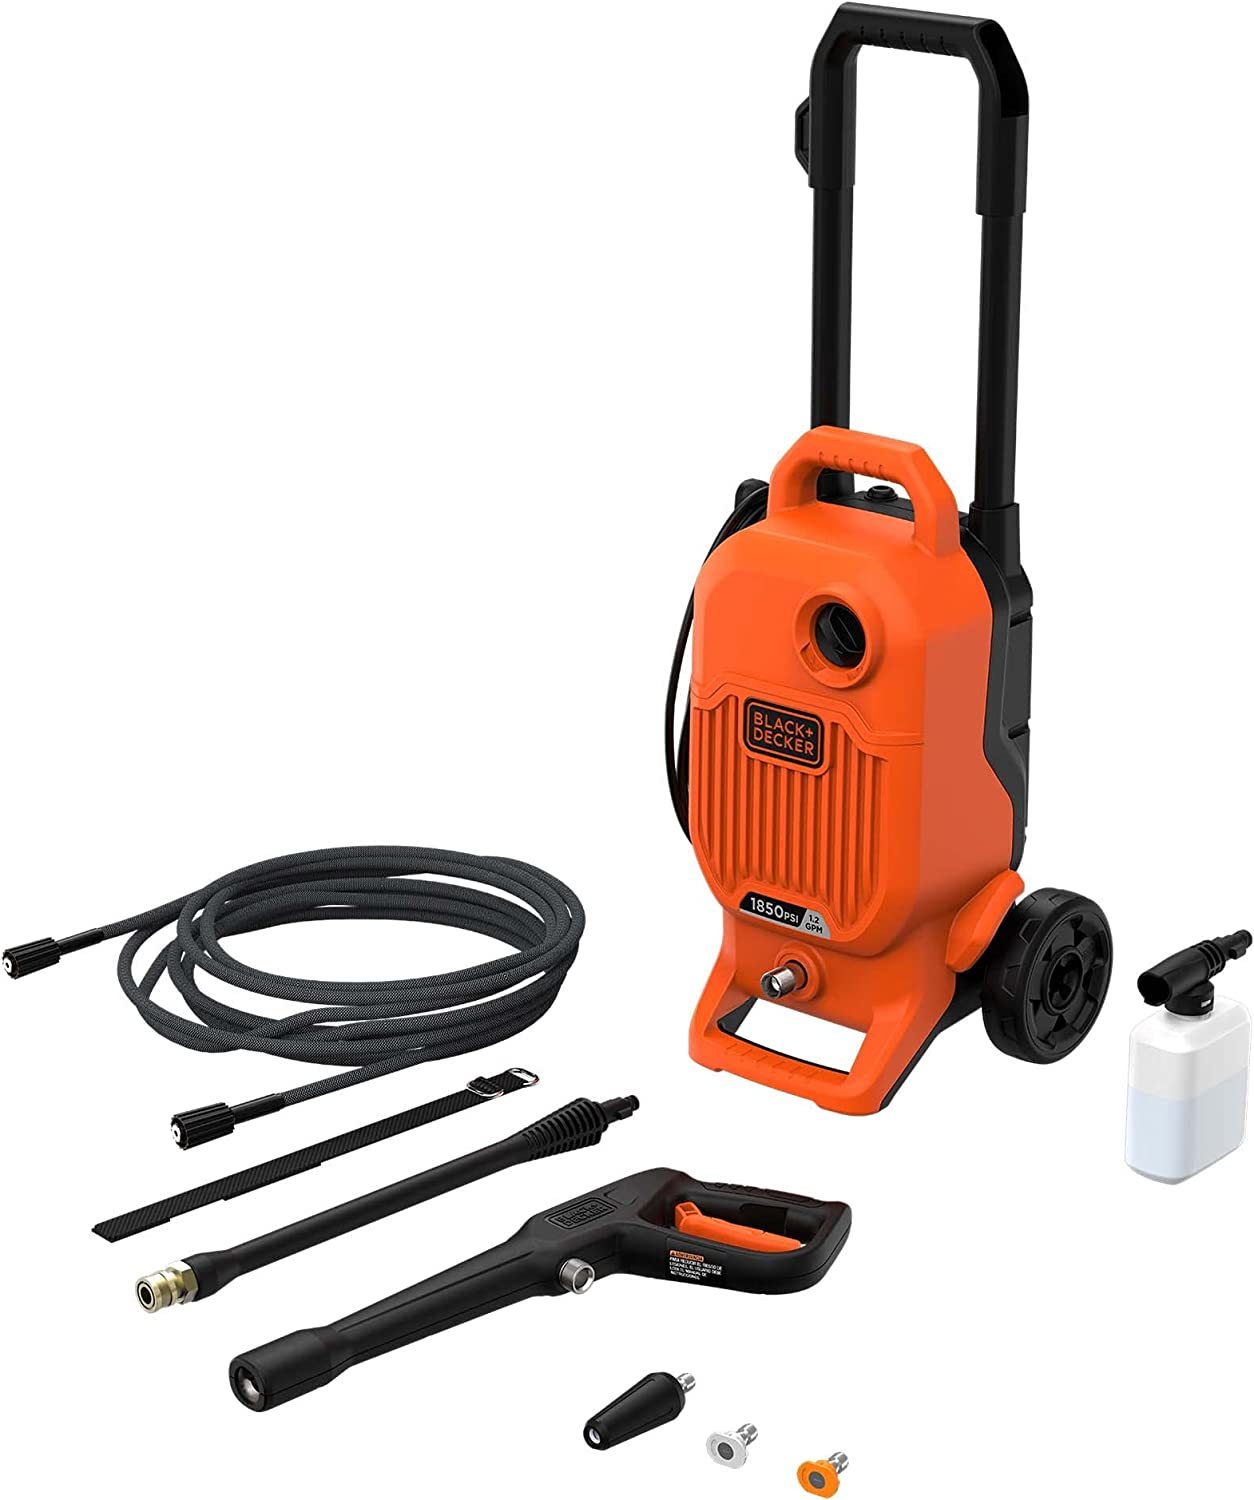 BRAND NEW-Pressure Washer Undercarriage Cleaner, 16 Inch Power Washer  Attachment FREE SHIPPING! - Pressure Washers, Facebook Marketplace